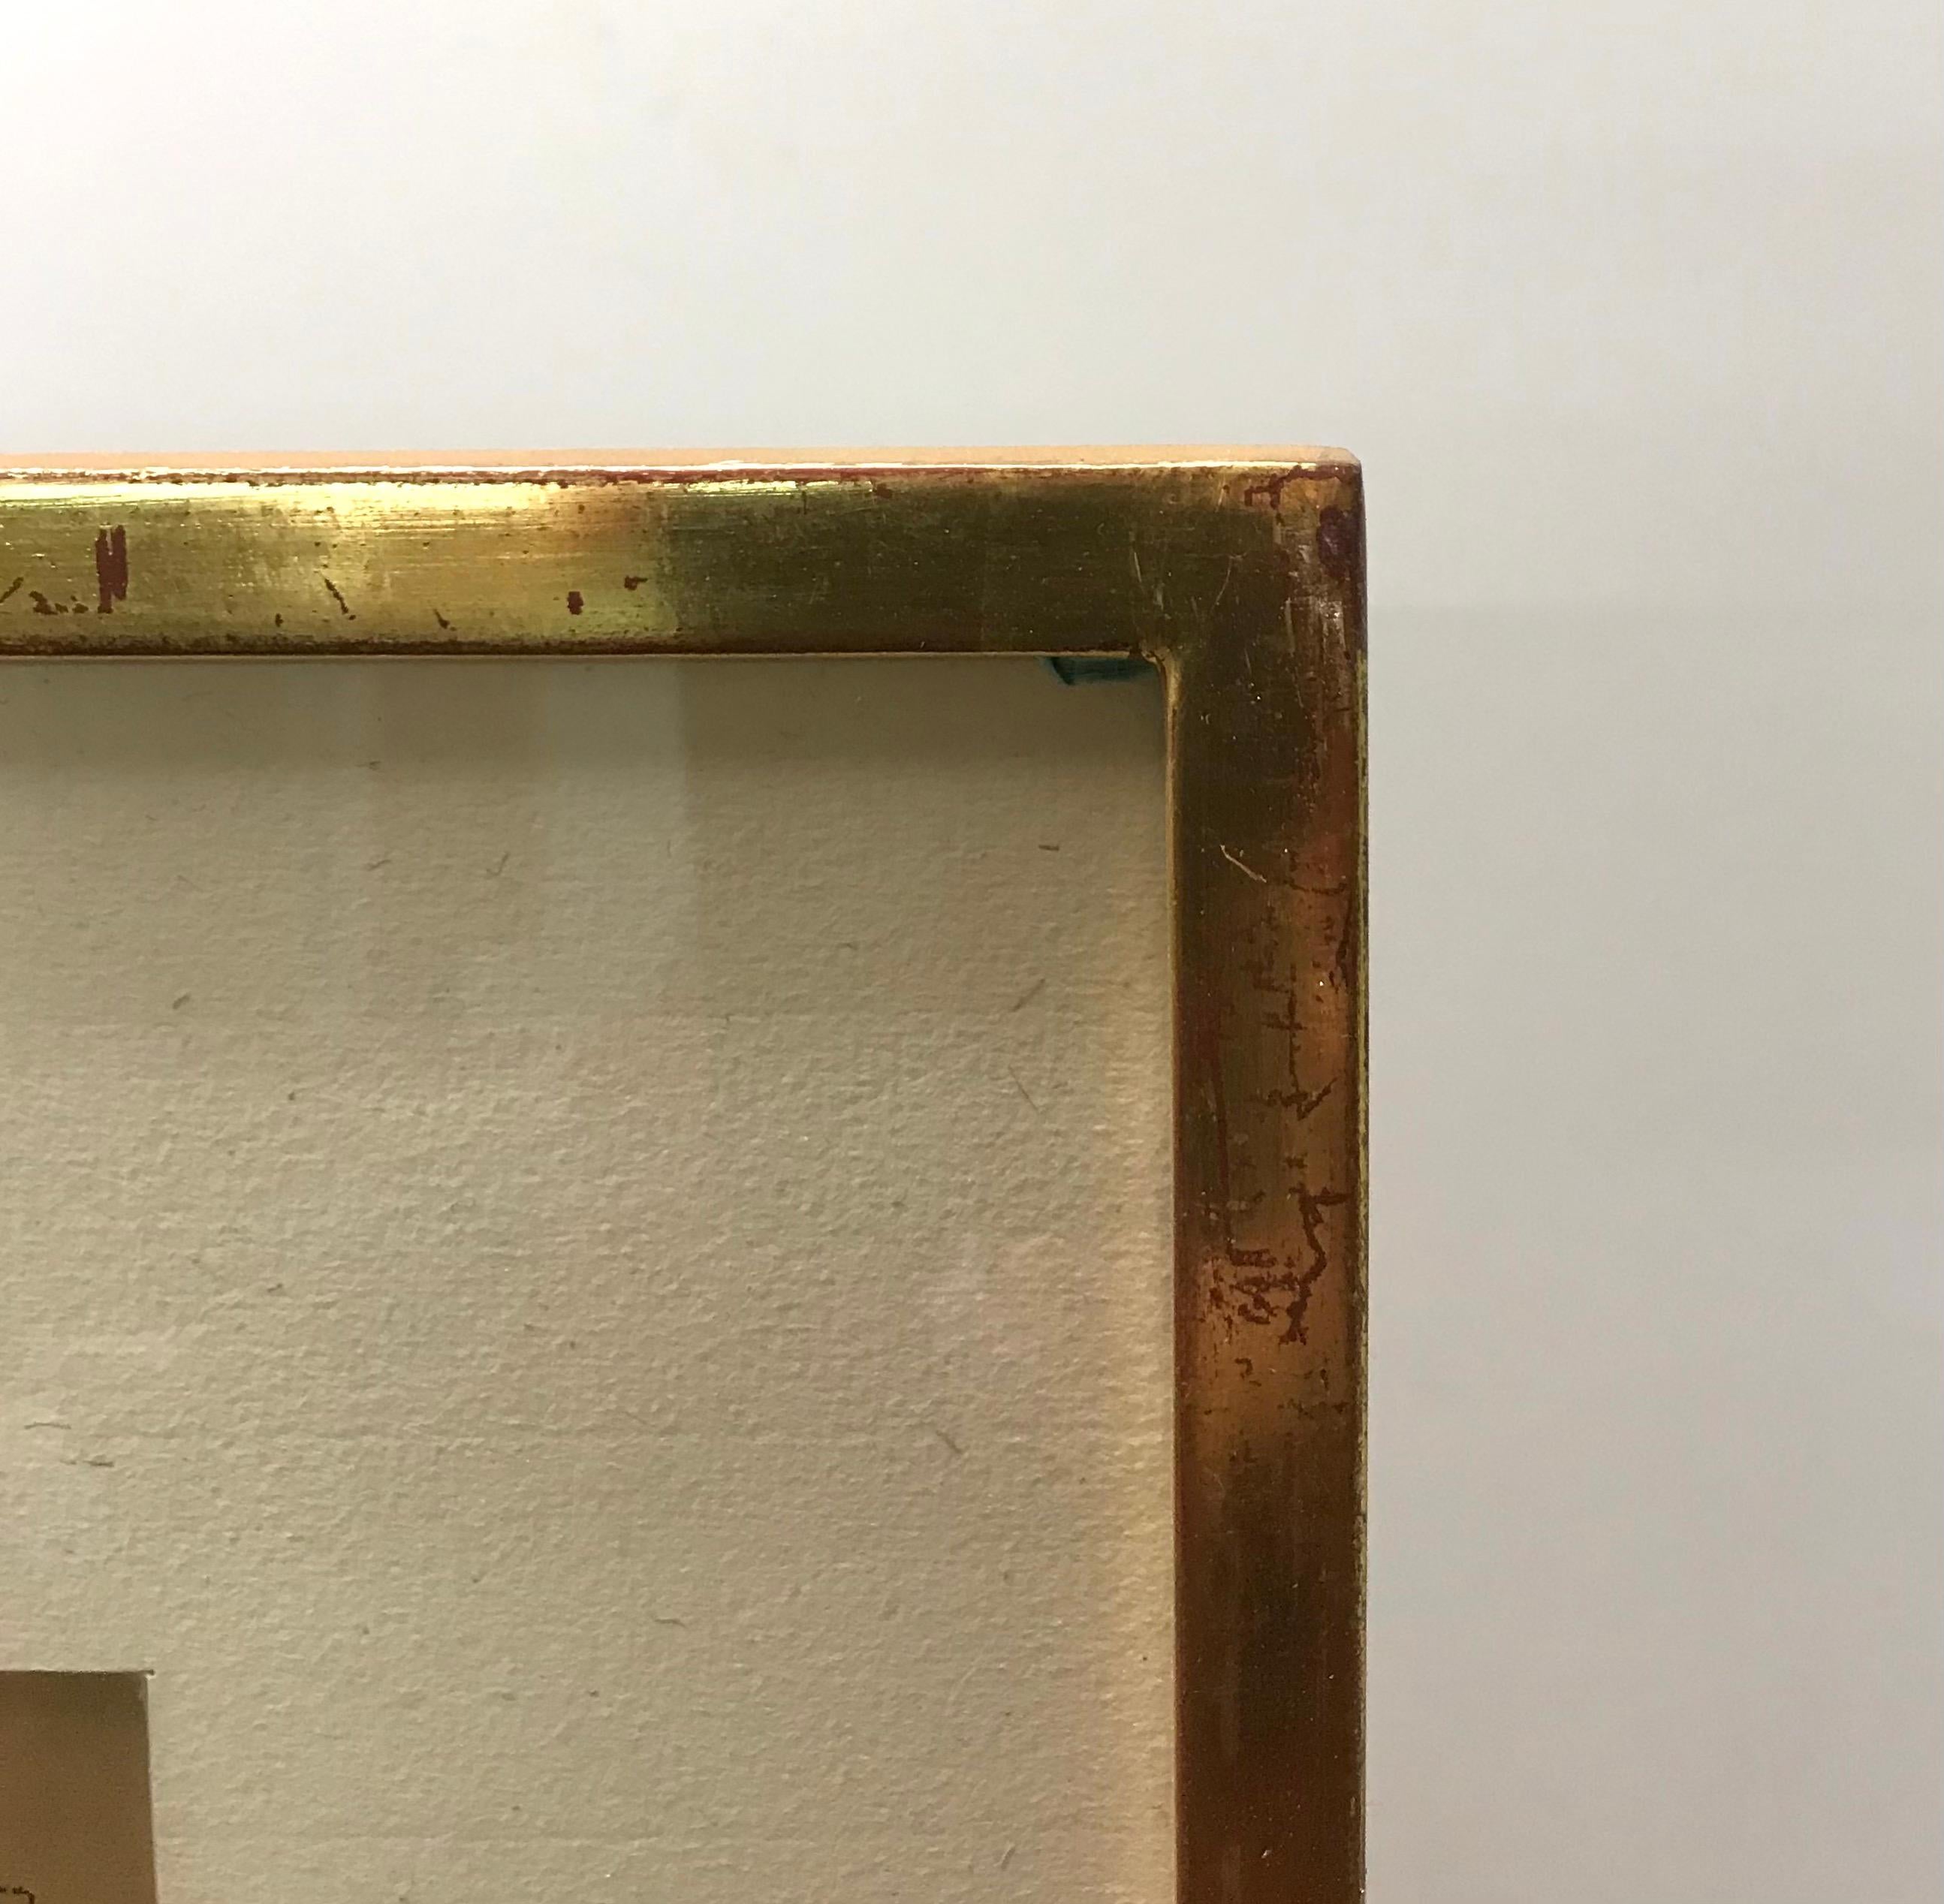 Work on paper
Golden wooden frame with glass pane
48 x 64 x 1 cm